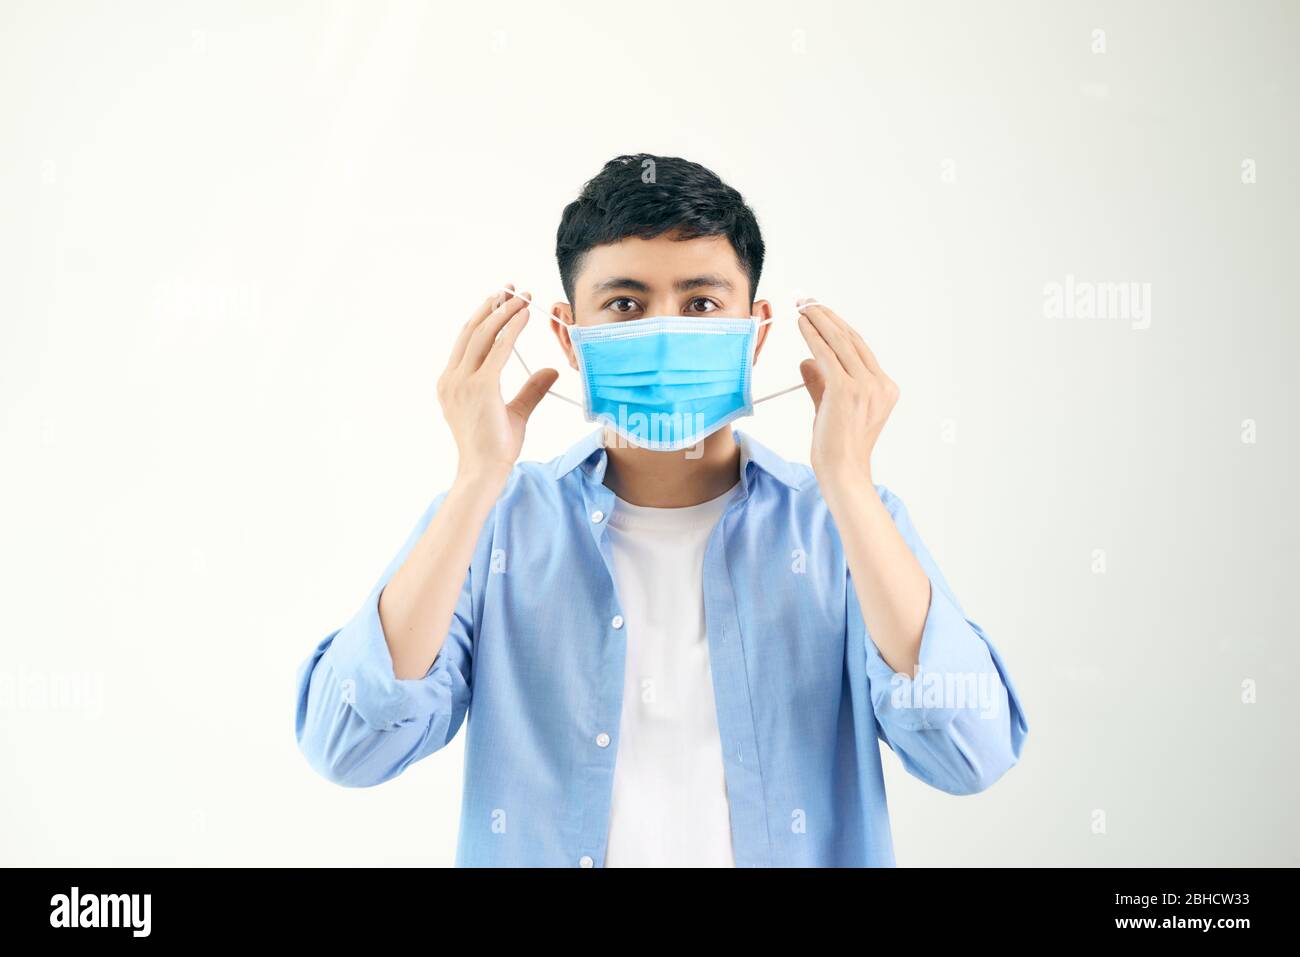 Man wearing an anti virus protection mask to prevent others from corona COVID-19 and SARS cov 2 infection Stock Photo